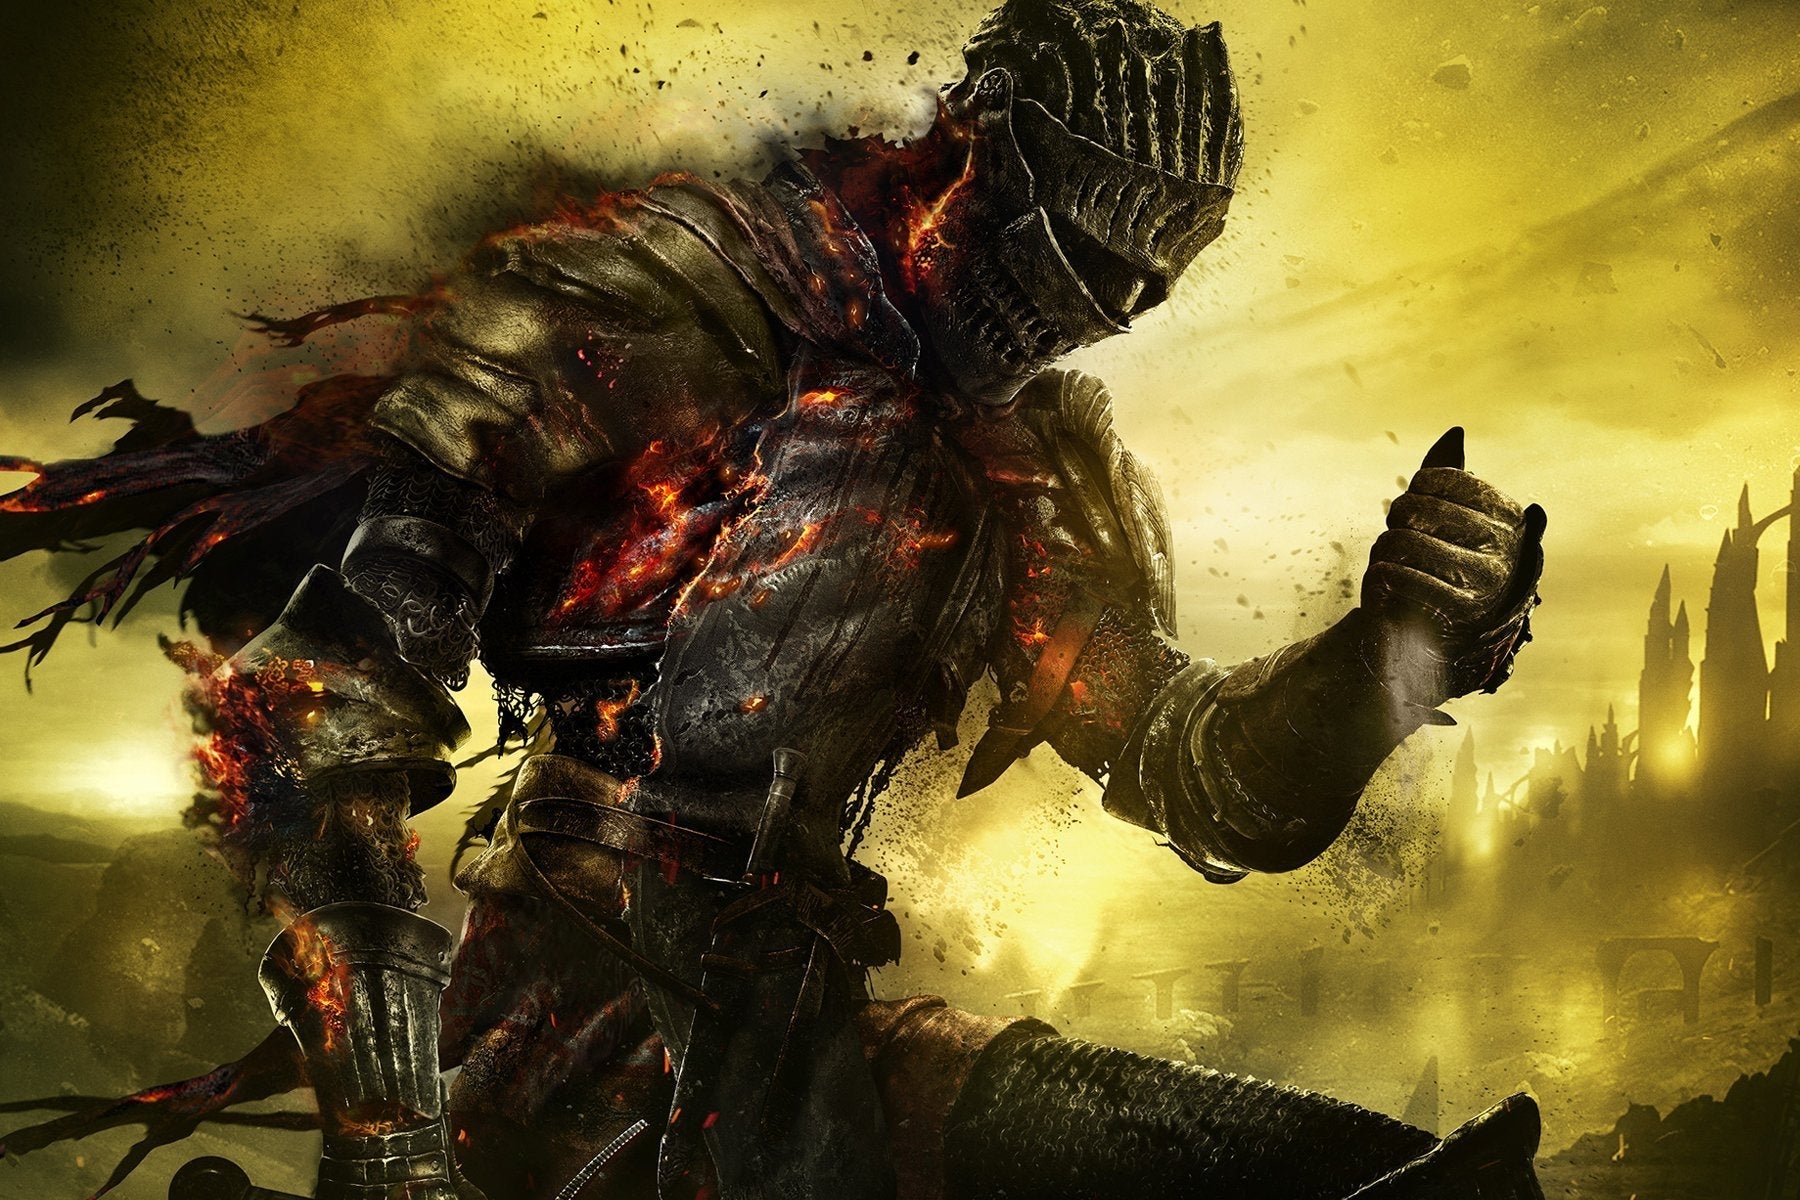 Image for Video: How I learned to stop worrying and love Dark Souls 3